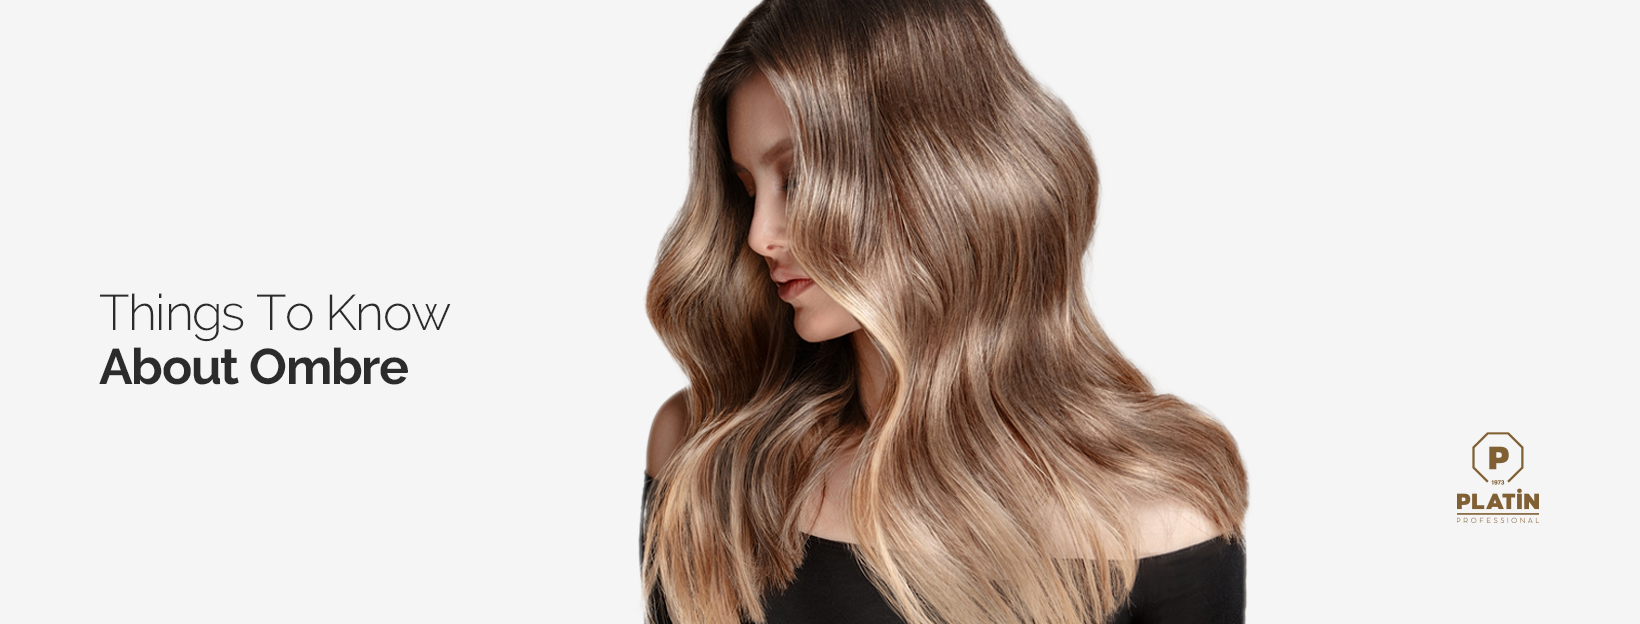 Things To Know About Ombre